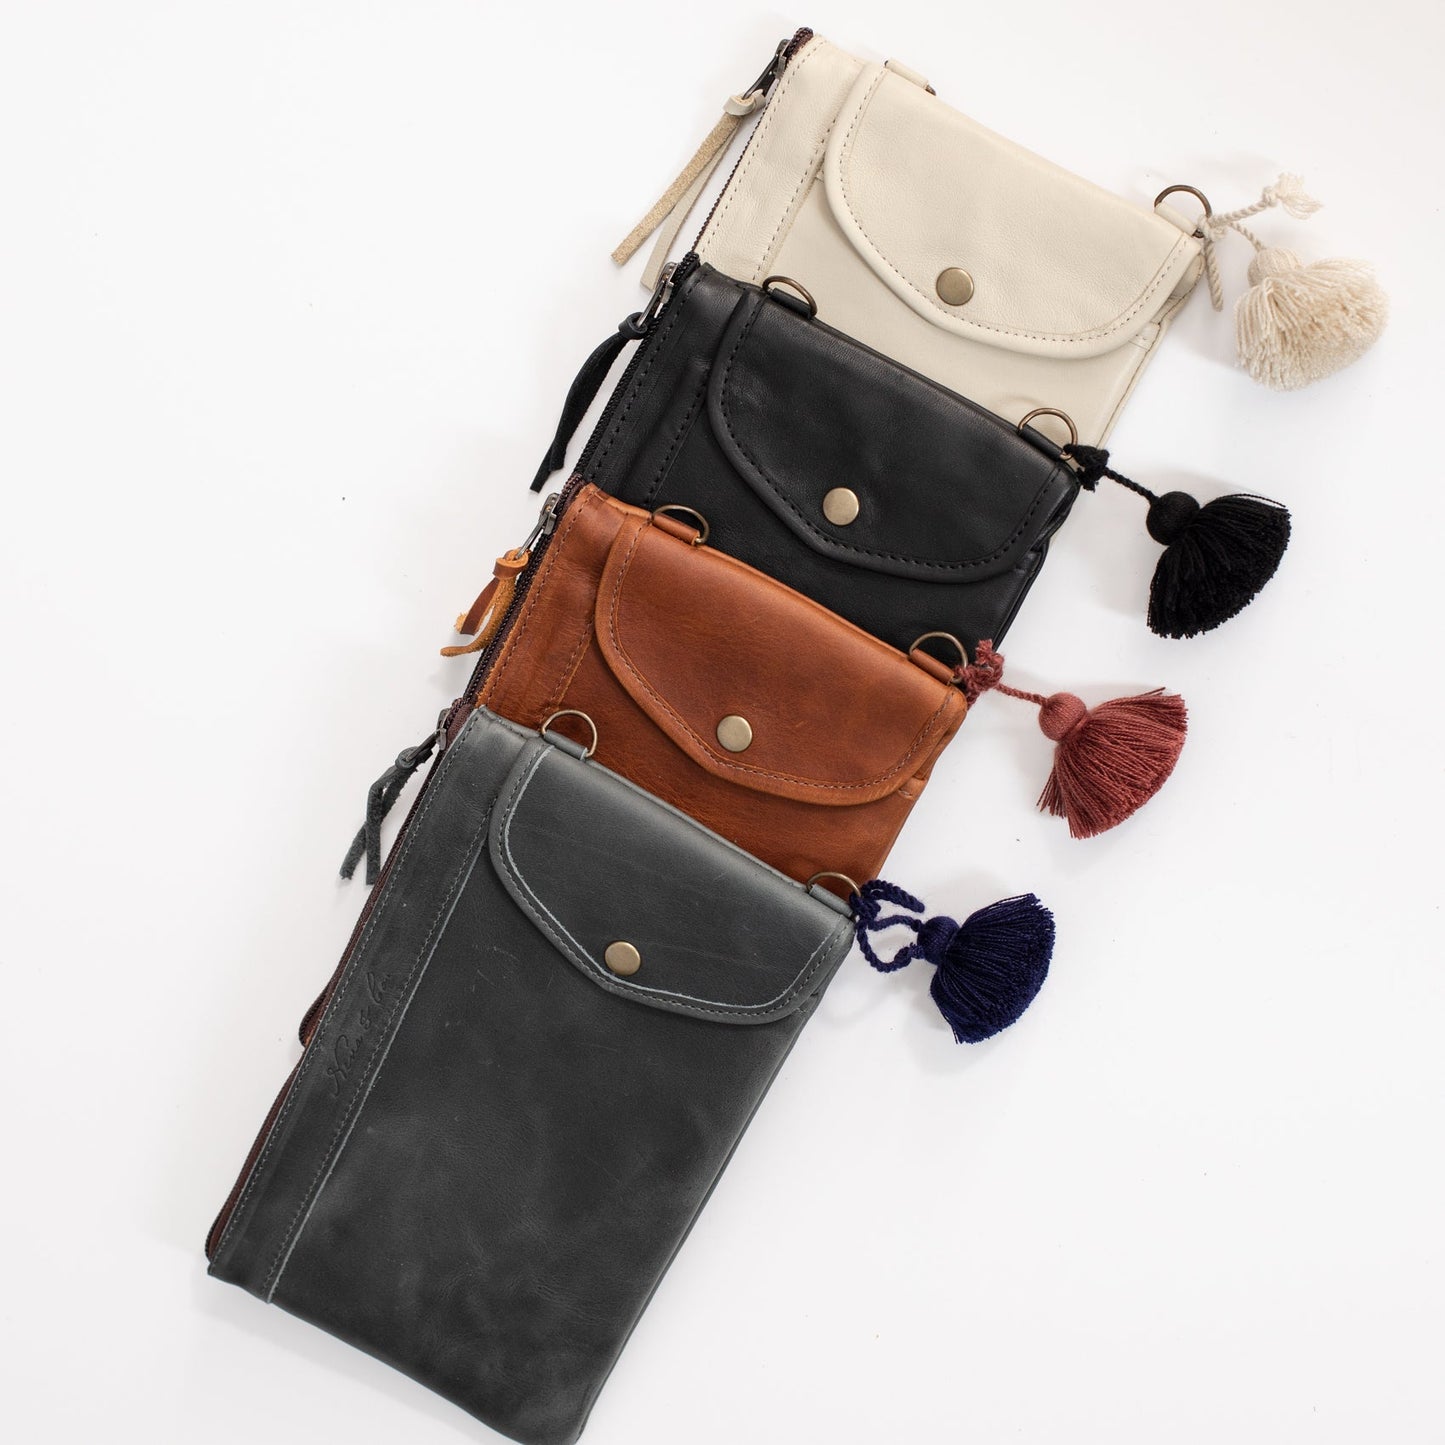 EVERYTHING CLUTCH WITH UTILITY POCKET - FULL LEATHER COLLECTION